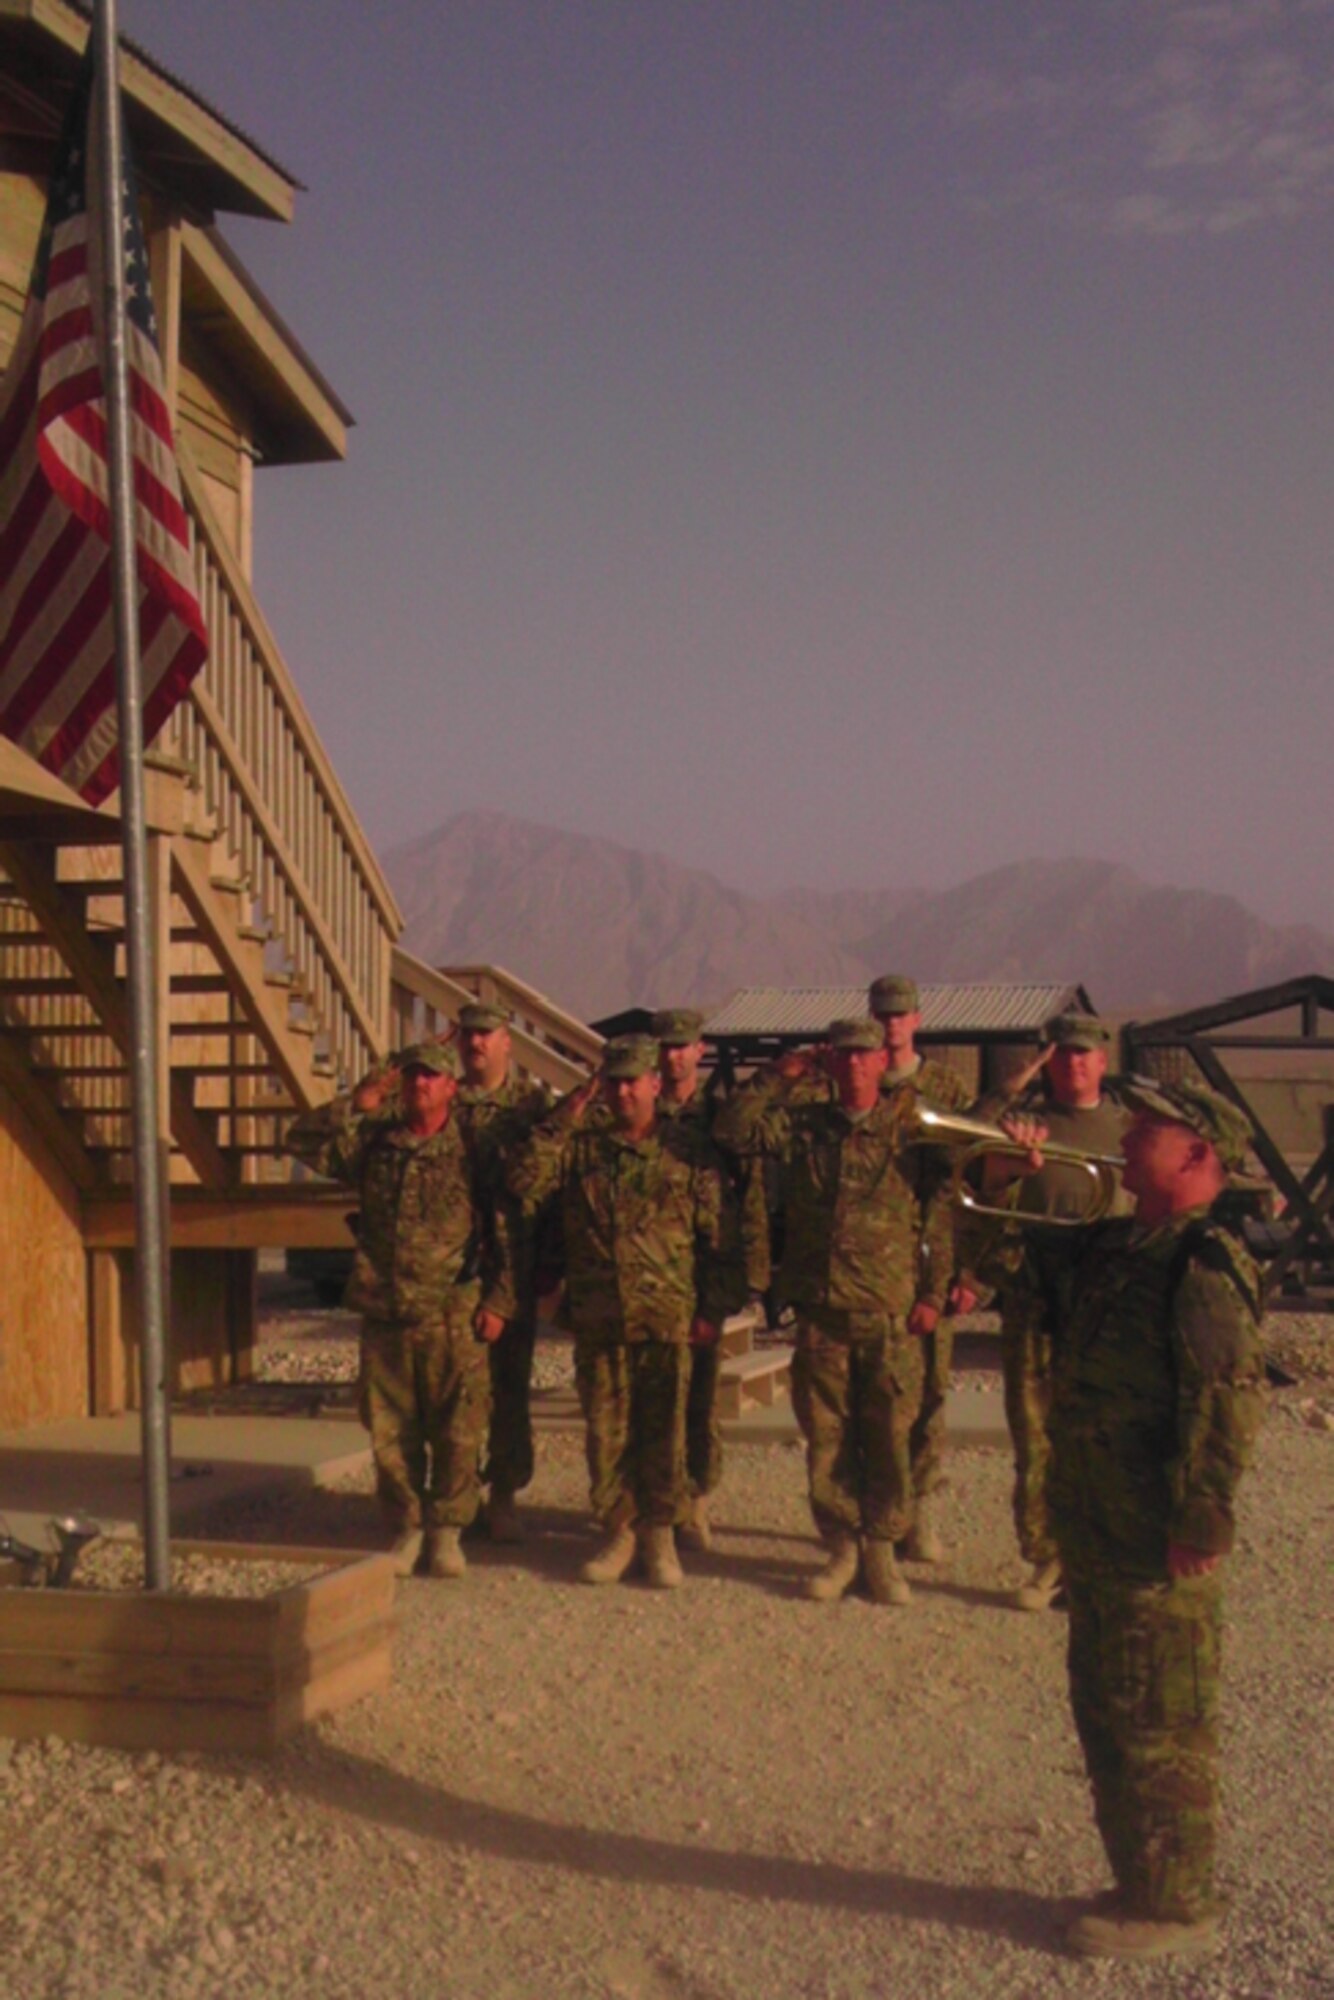 CAMP MARMAL, Afghanistan – With the mountains of northern Afghanistan in the distance, Lt. Col. Rich Gaddis sounds Taps at a Forward Operating Base memorial ceremony on September 11, 2012.  In formation in the front row from left to right are, Staff Sgt. McMillan, Chief Warrant Officer 4 Grover, Master Sgt. Wollett, Chief Warrant Officer 3 Carter; and in the back row are, Chief Warrant Officer 2 Buckalew, Chief Warrant Officer 3 Jones, and Chief Warrant Officer 2 Landies.  (U.S. Air Force photo by Tech. Sgt. Tamieka Wanzo)